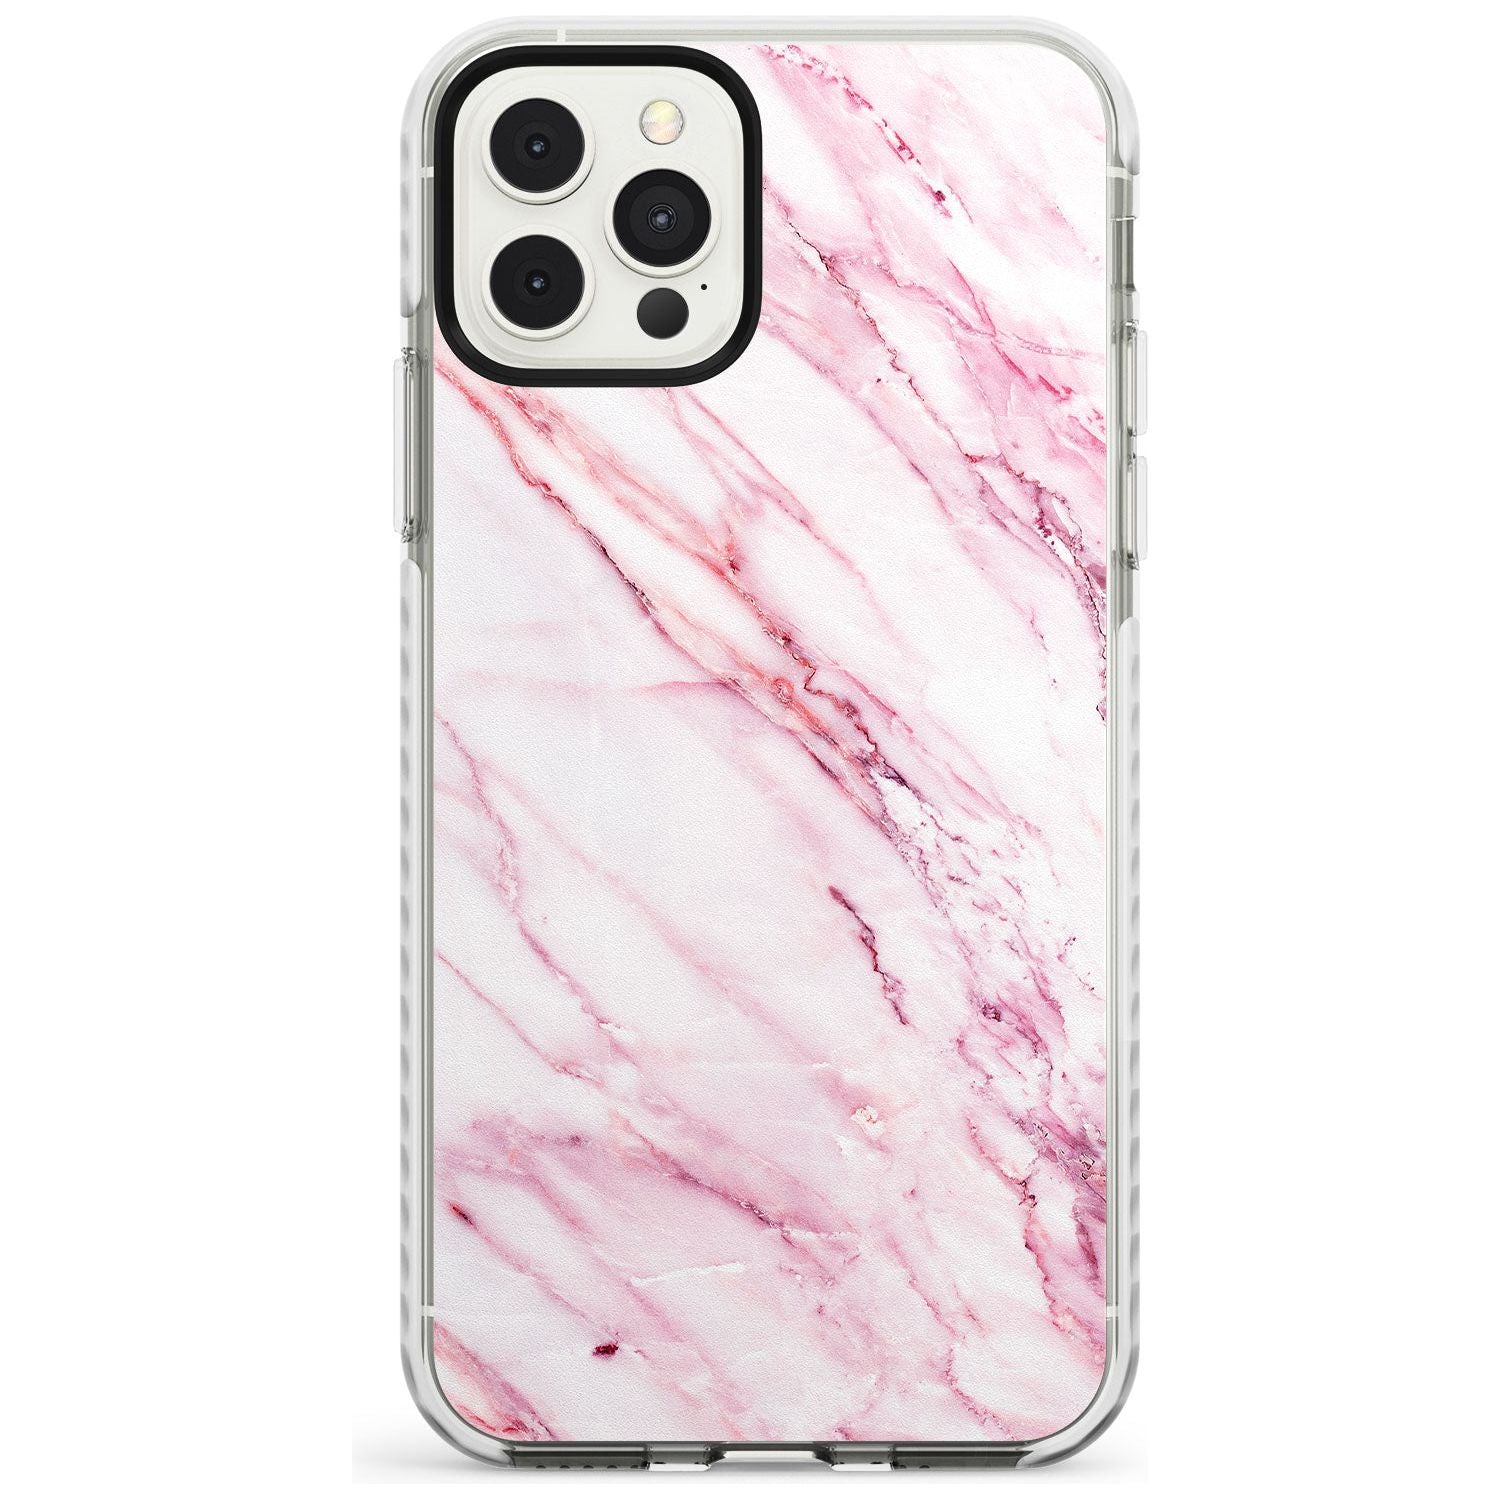 White & Pink Onyx Marble Texture Slim TPU Phone Case for iPhone 11 Pro Max